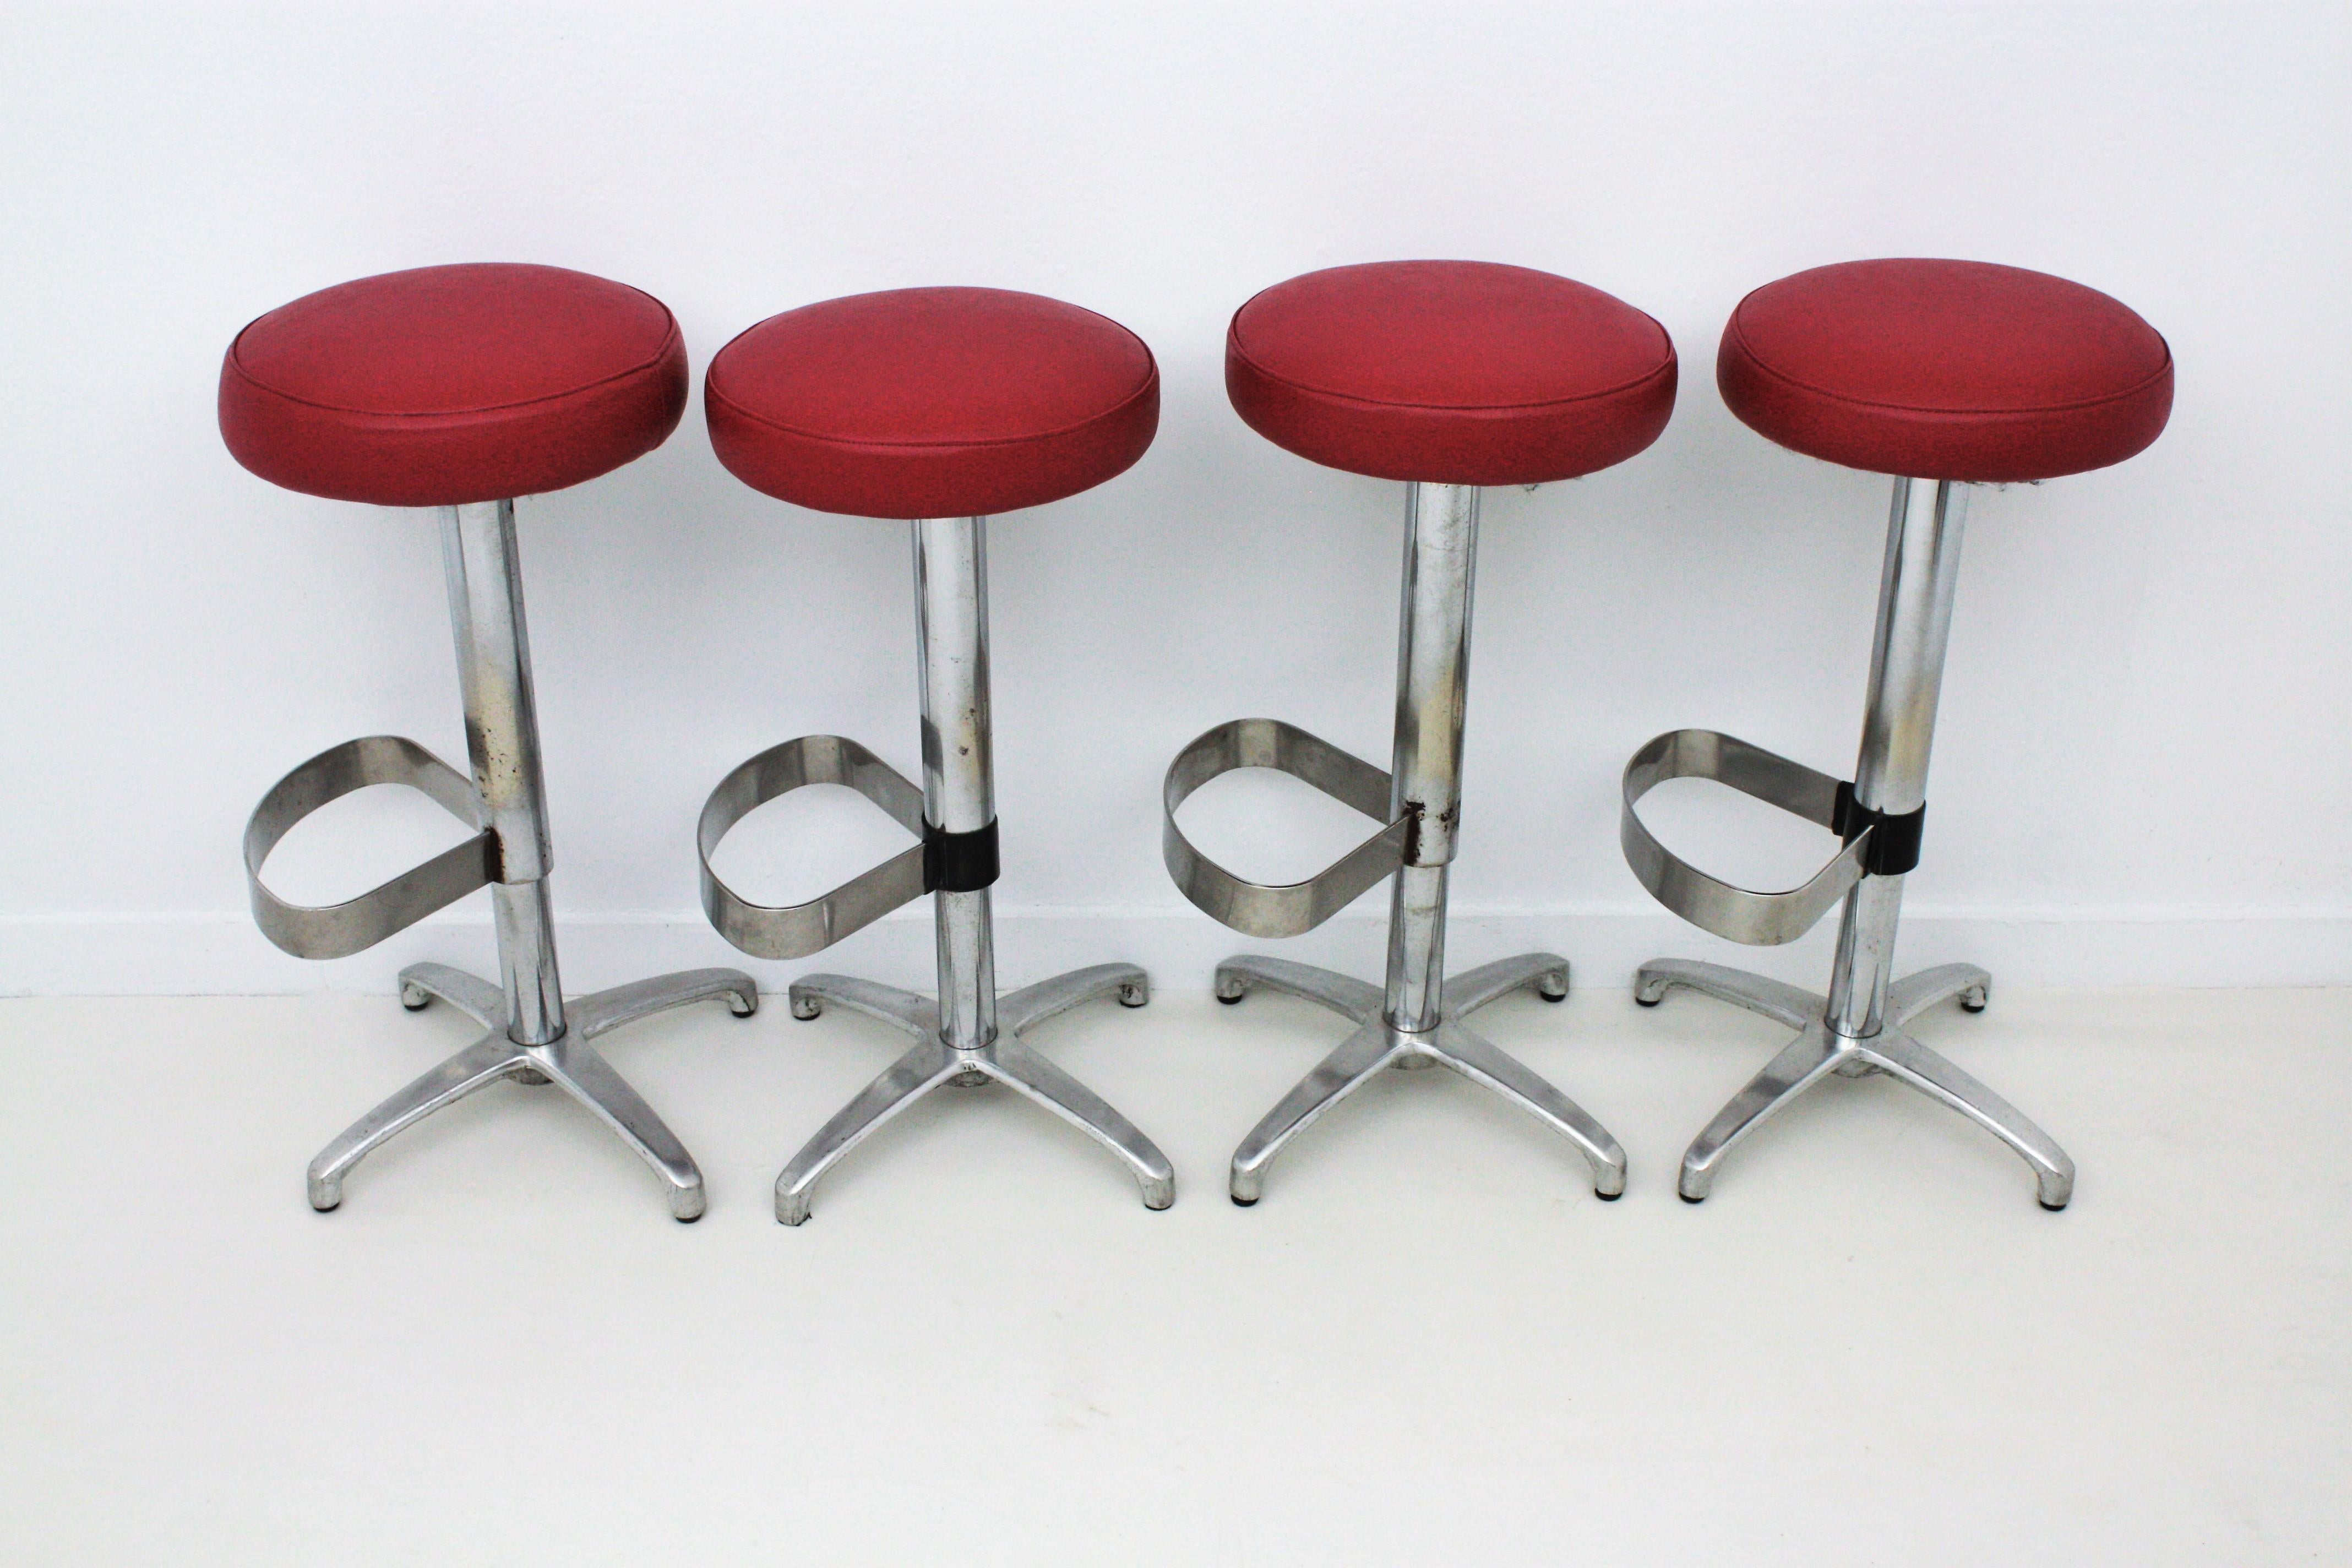 Set of four swivel bar stools in metal and red leatherette upholstered seats, Spain, 1970s.
These highly comfortable high barstools have a chromed steel structure with loop-shape footrest standing on a four-footed polished aluminium base. The soft